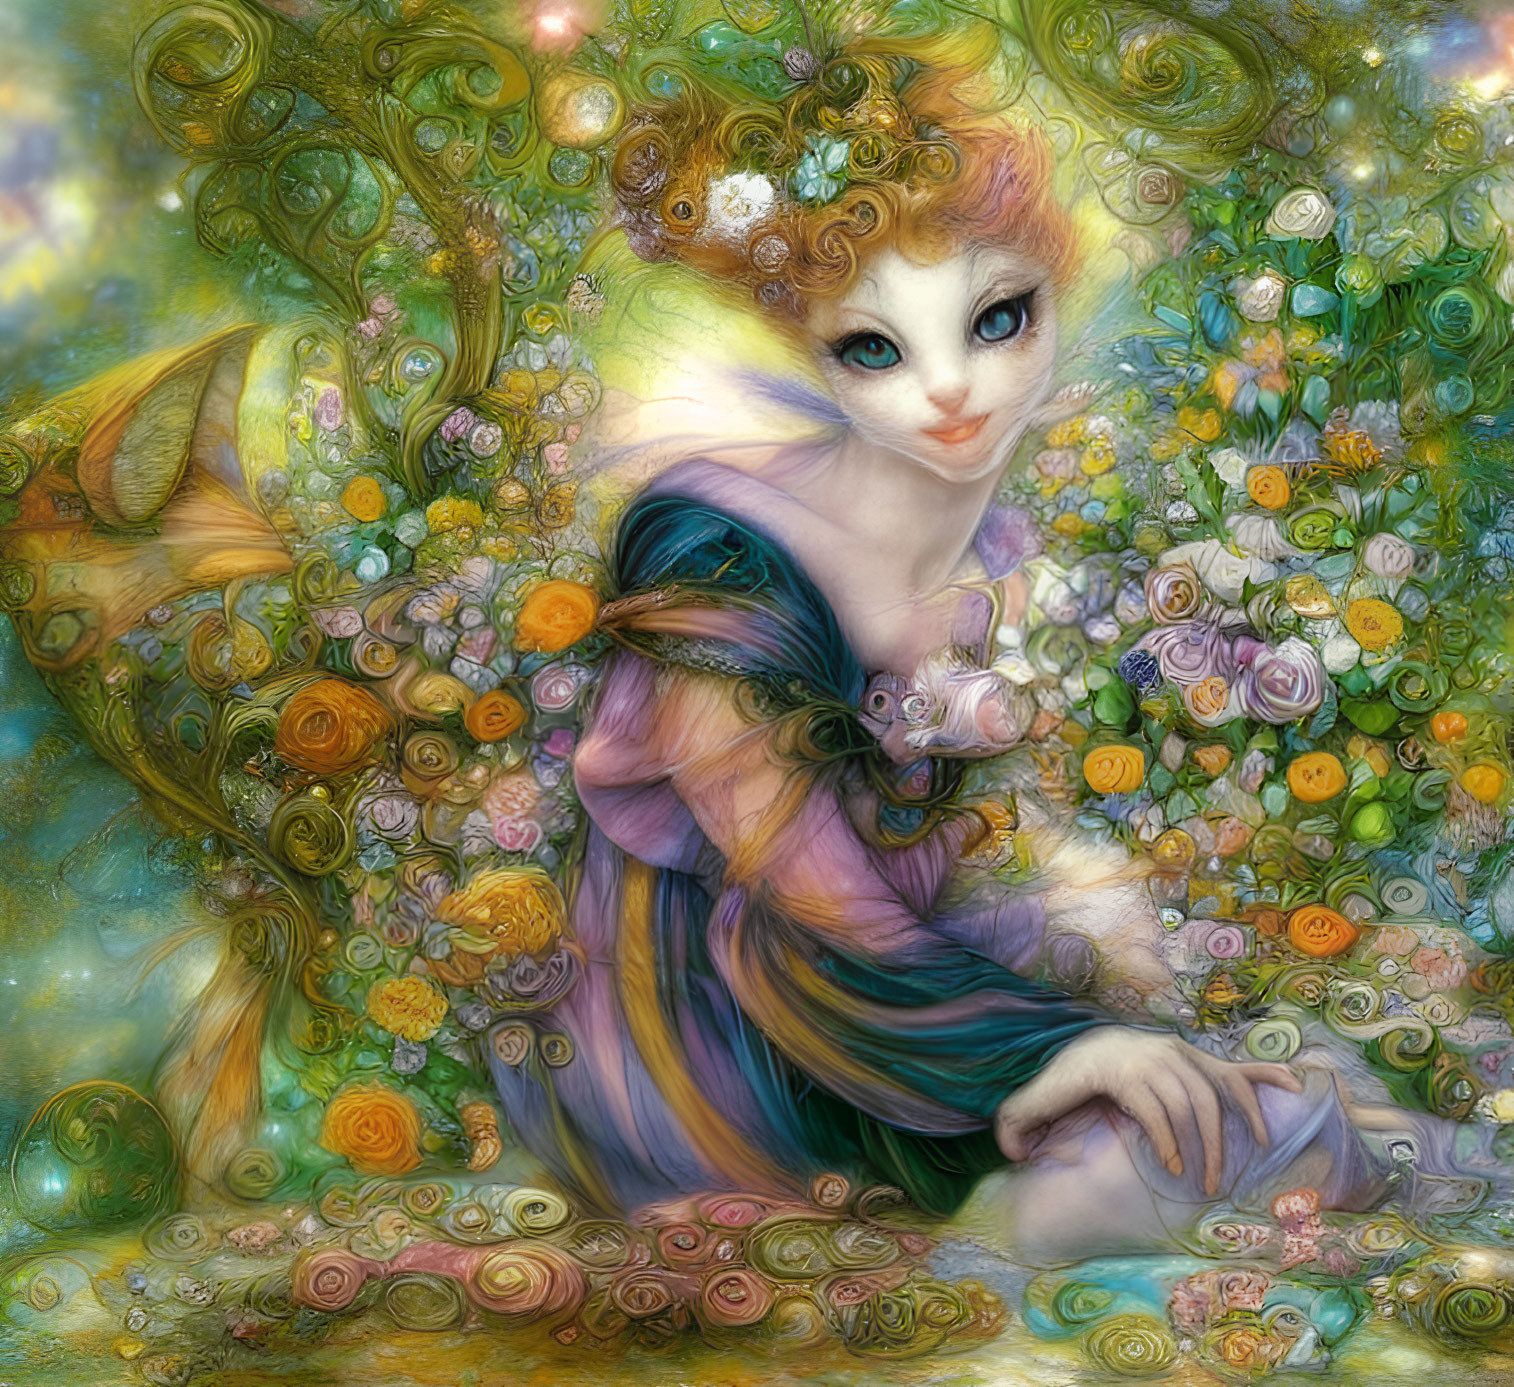 Ethereal fantasy illustration of whimsical female figure with floral motifs